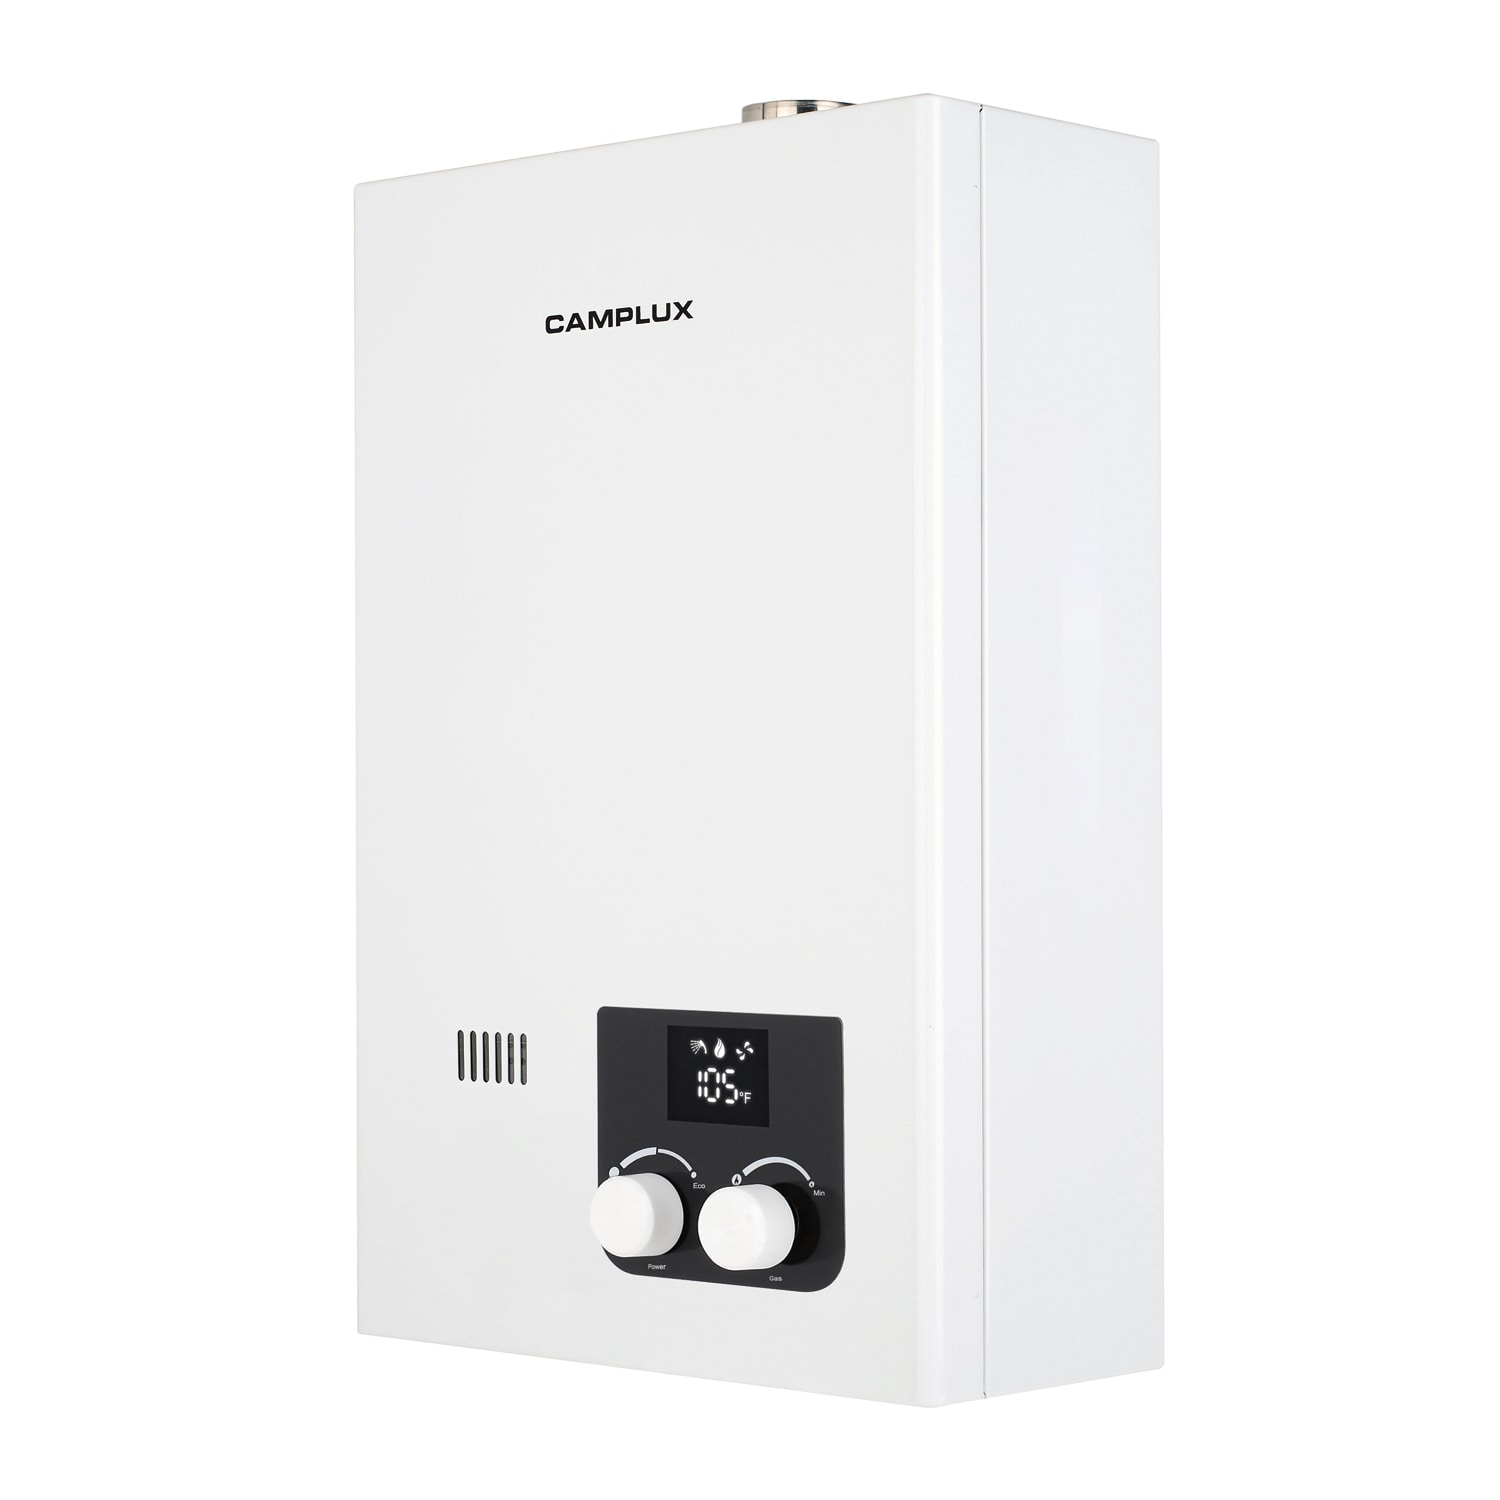 Camplux BD158 Pro 1.58 GPM Tankless Propane Water Heater